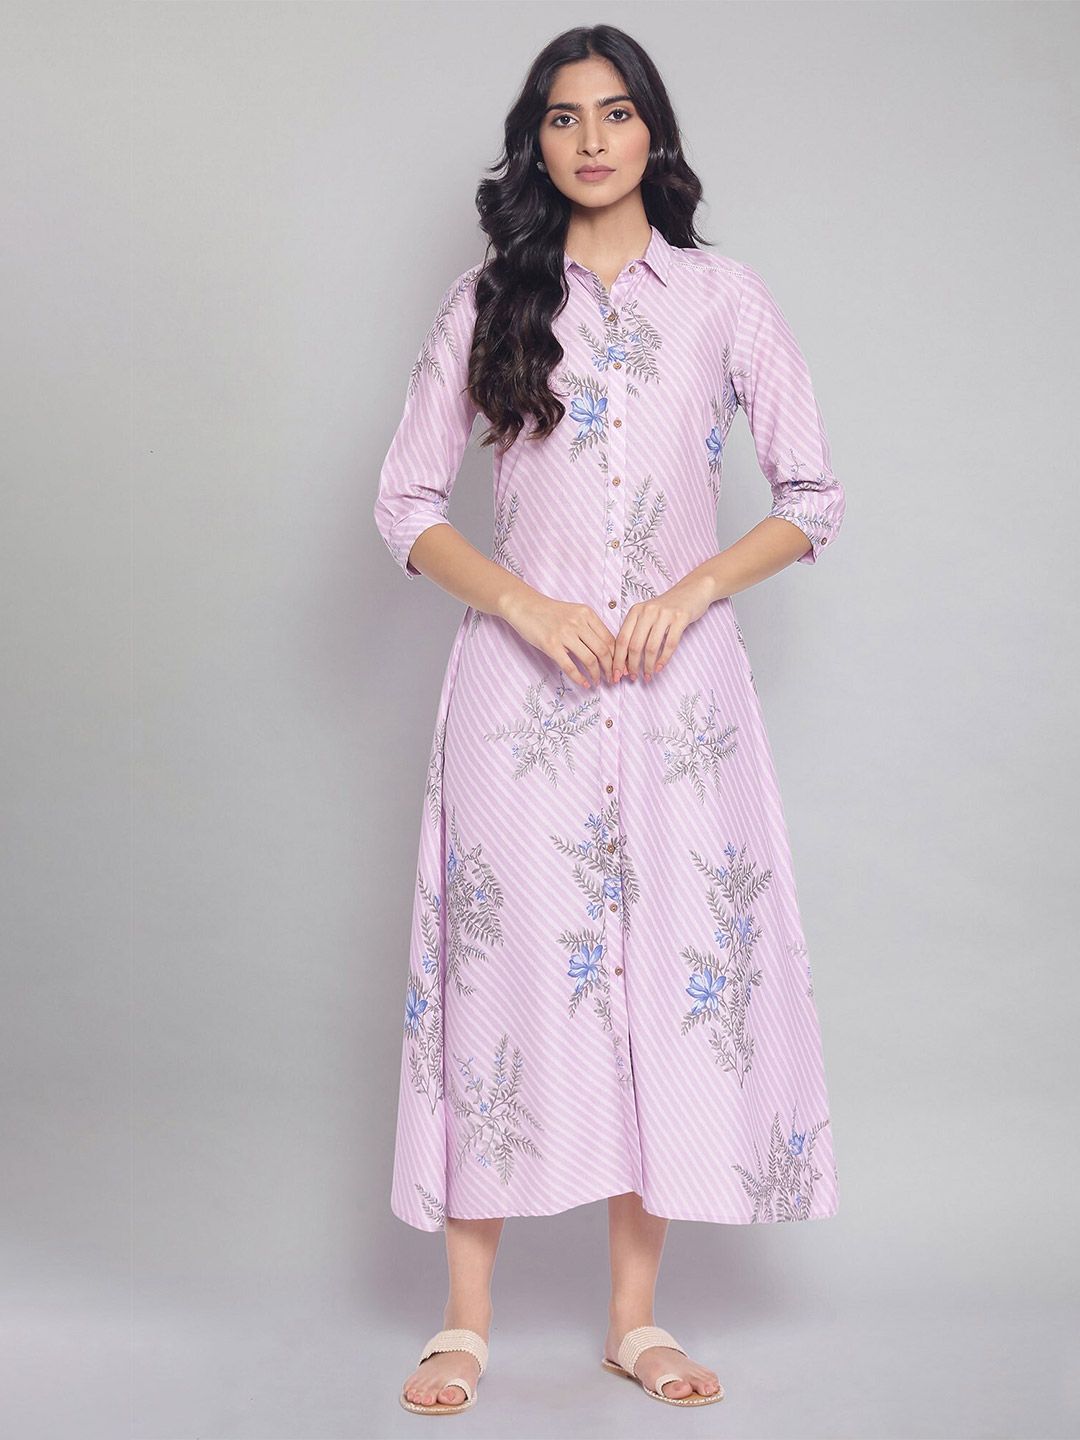 W Pink Floral Shirt Midi Dress Price in India